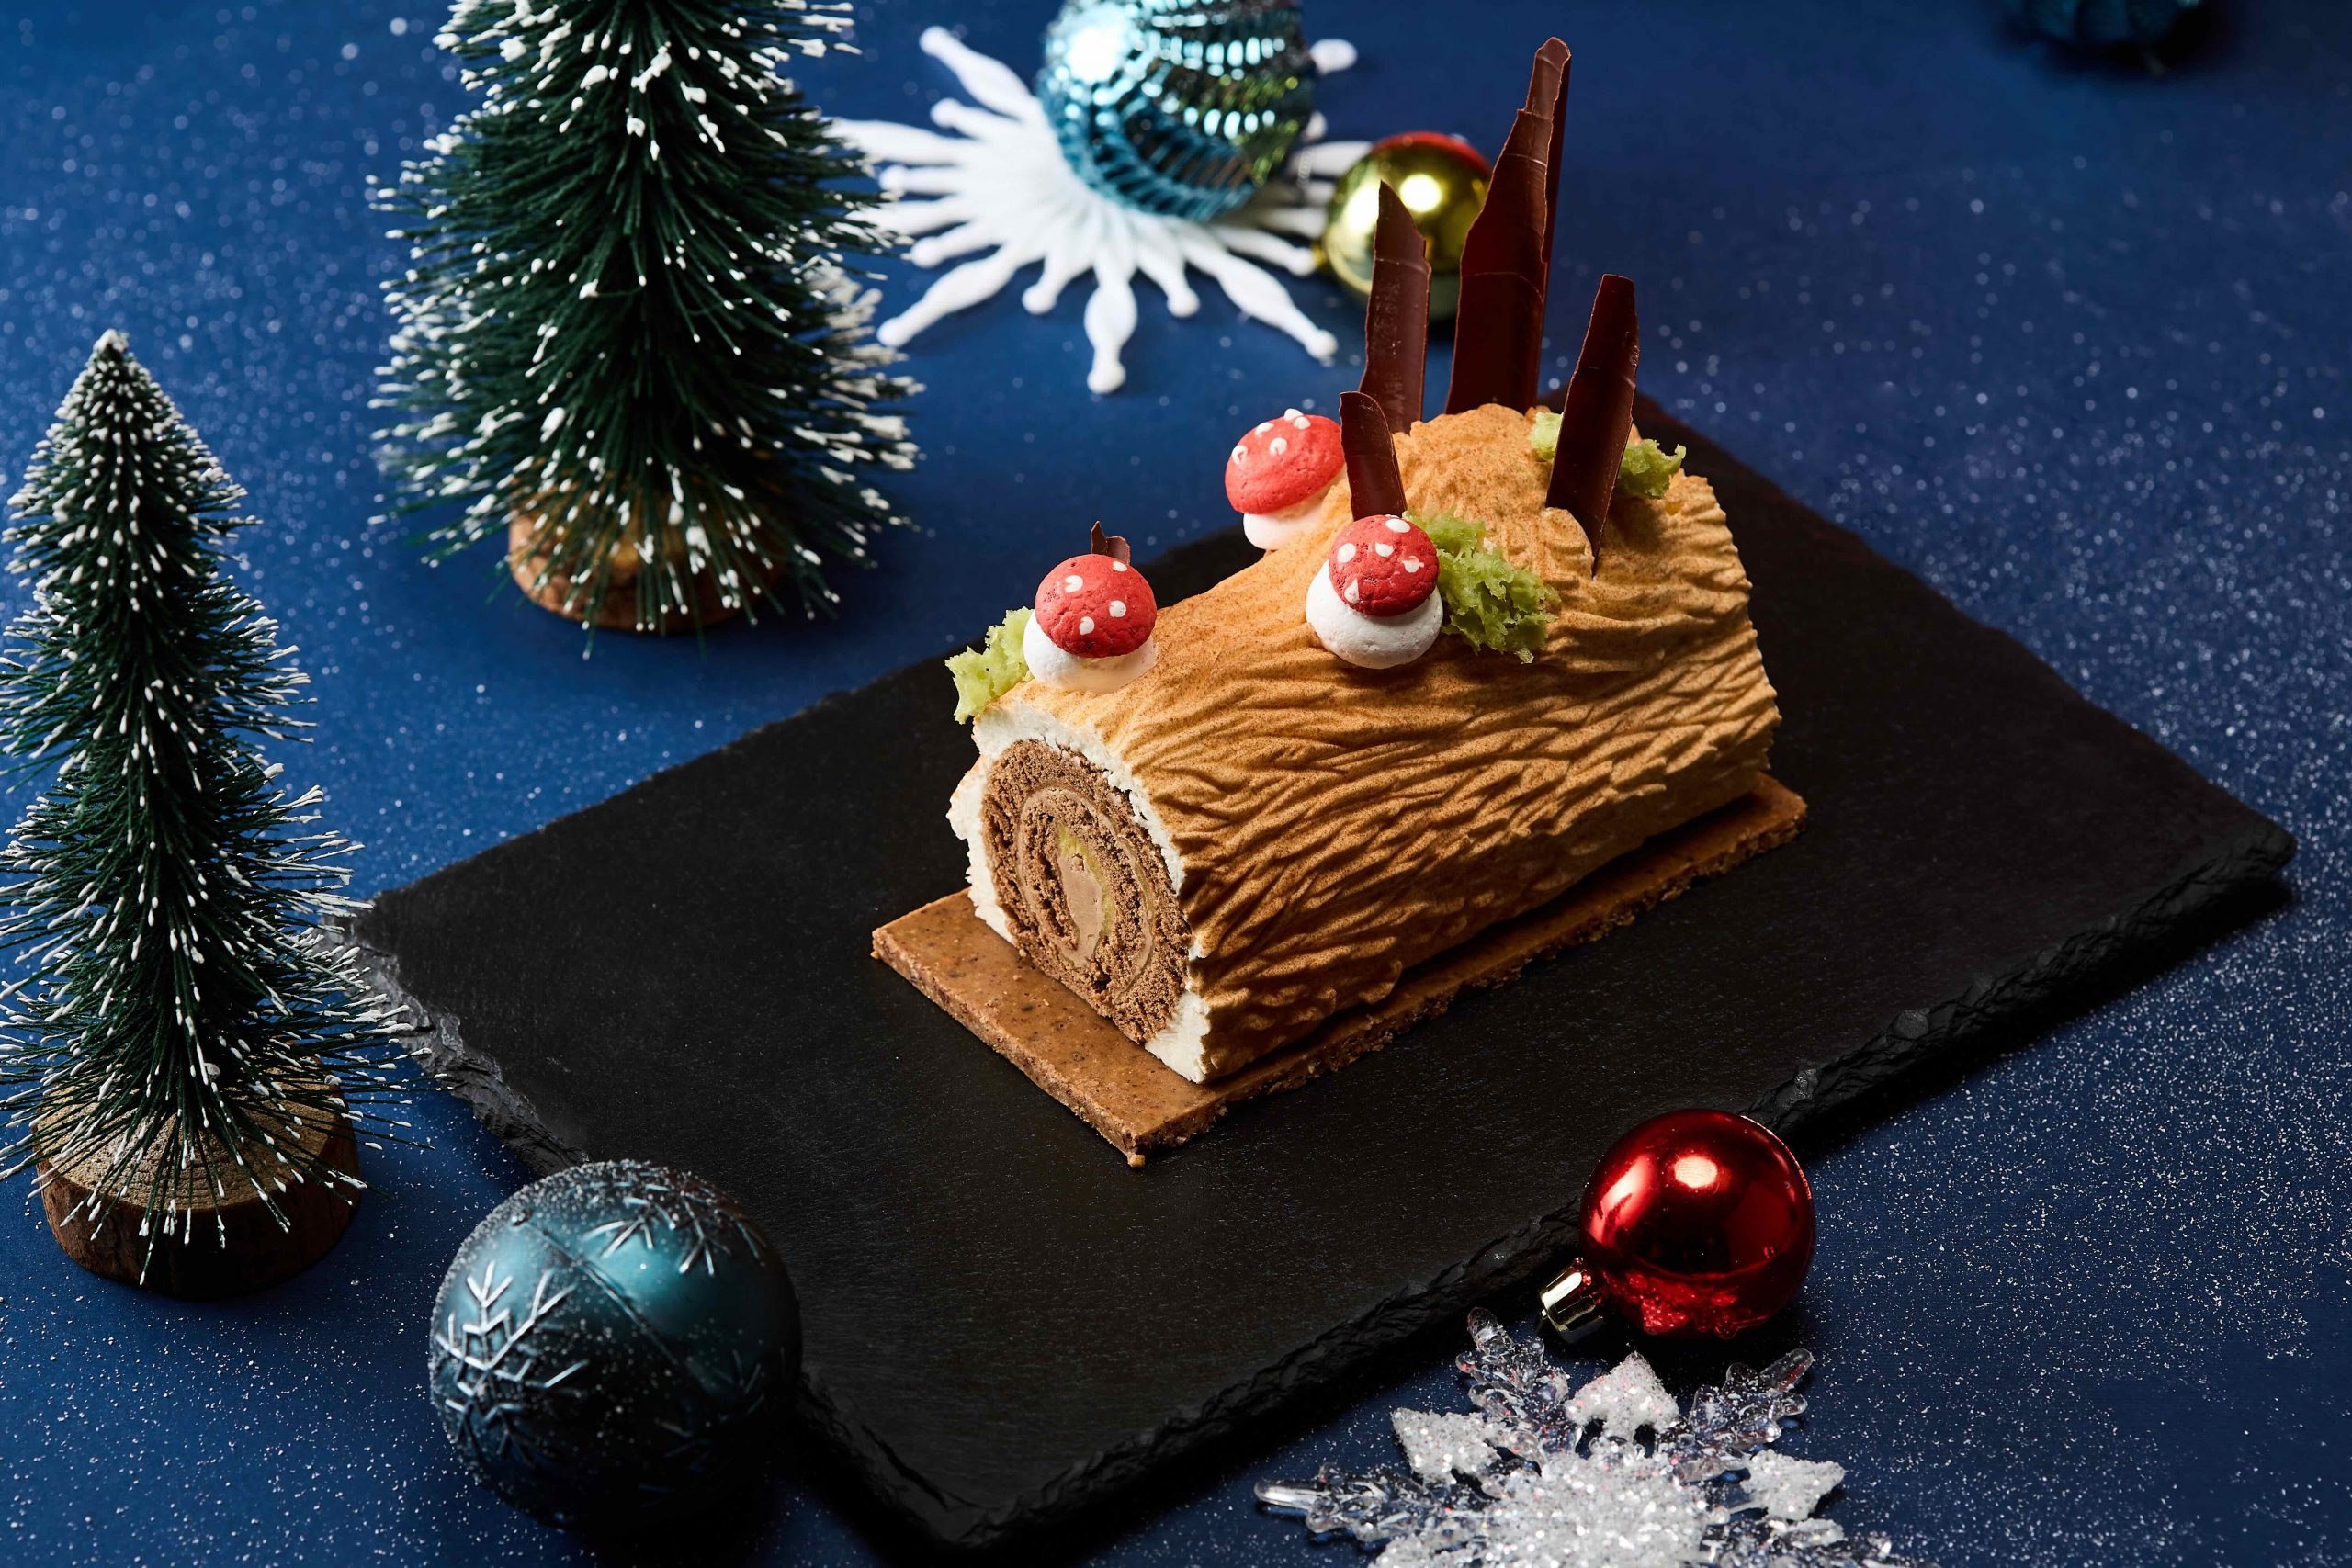 Inspired by ancient mid-winter festivals, the classic bûche de Noël has become synonymous with French Christmas feasts